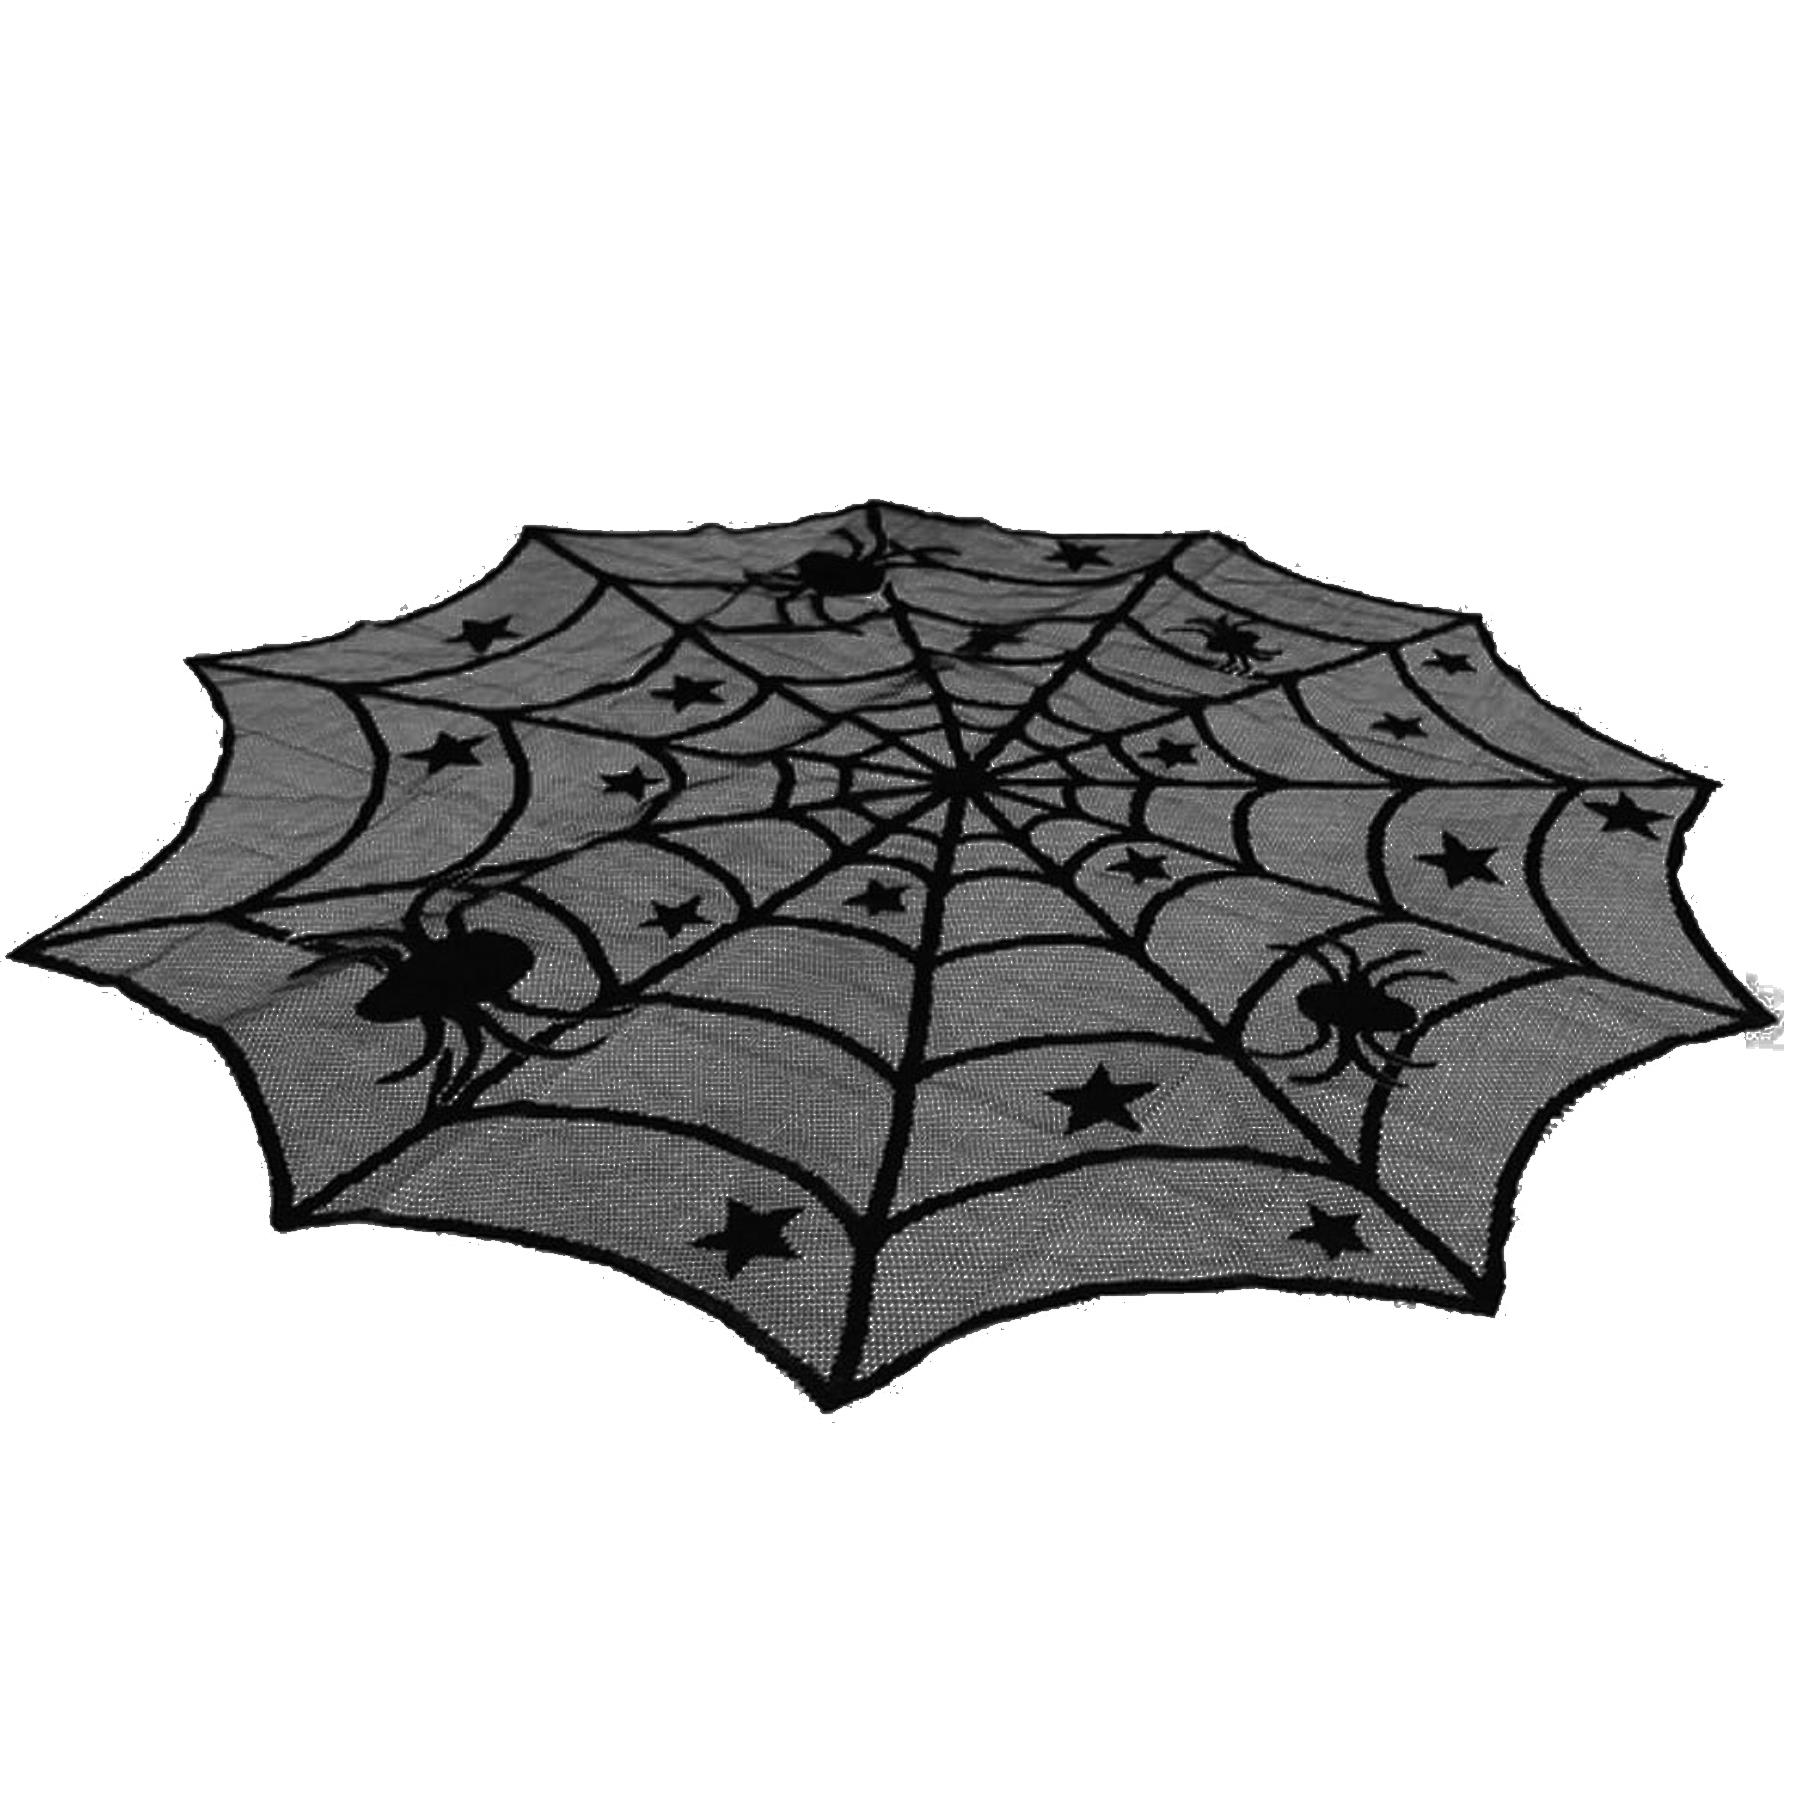 Halloween 100cm Spider Web Lace Tablecloth Black Round Topper Party Decoration